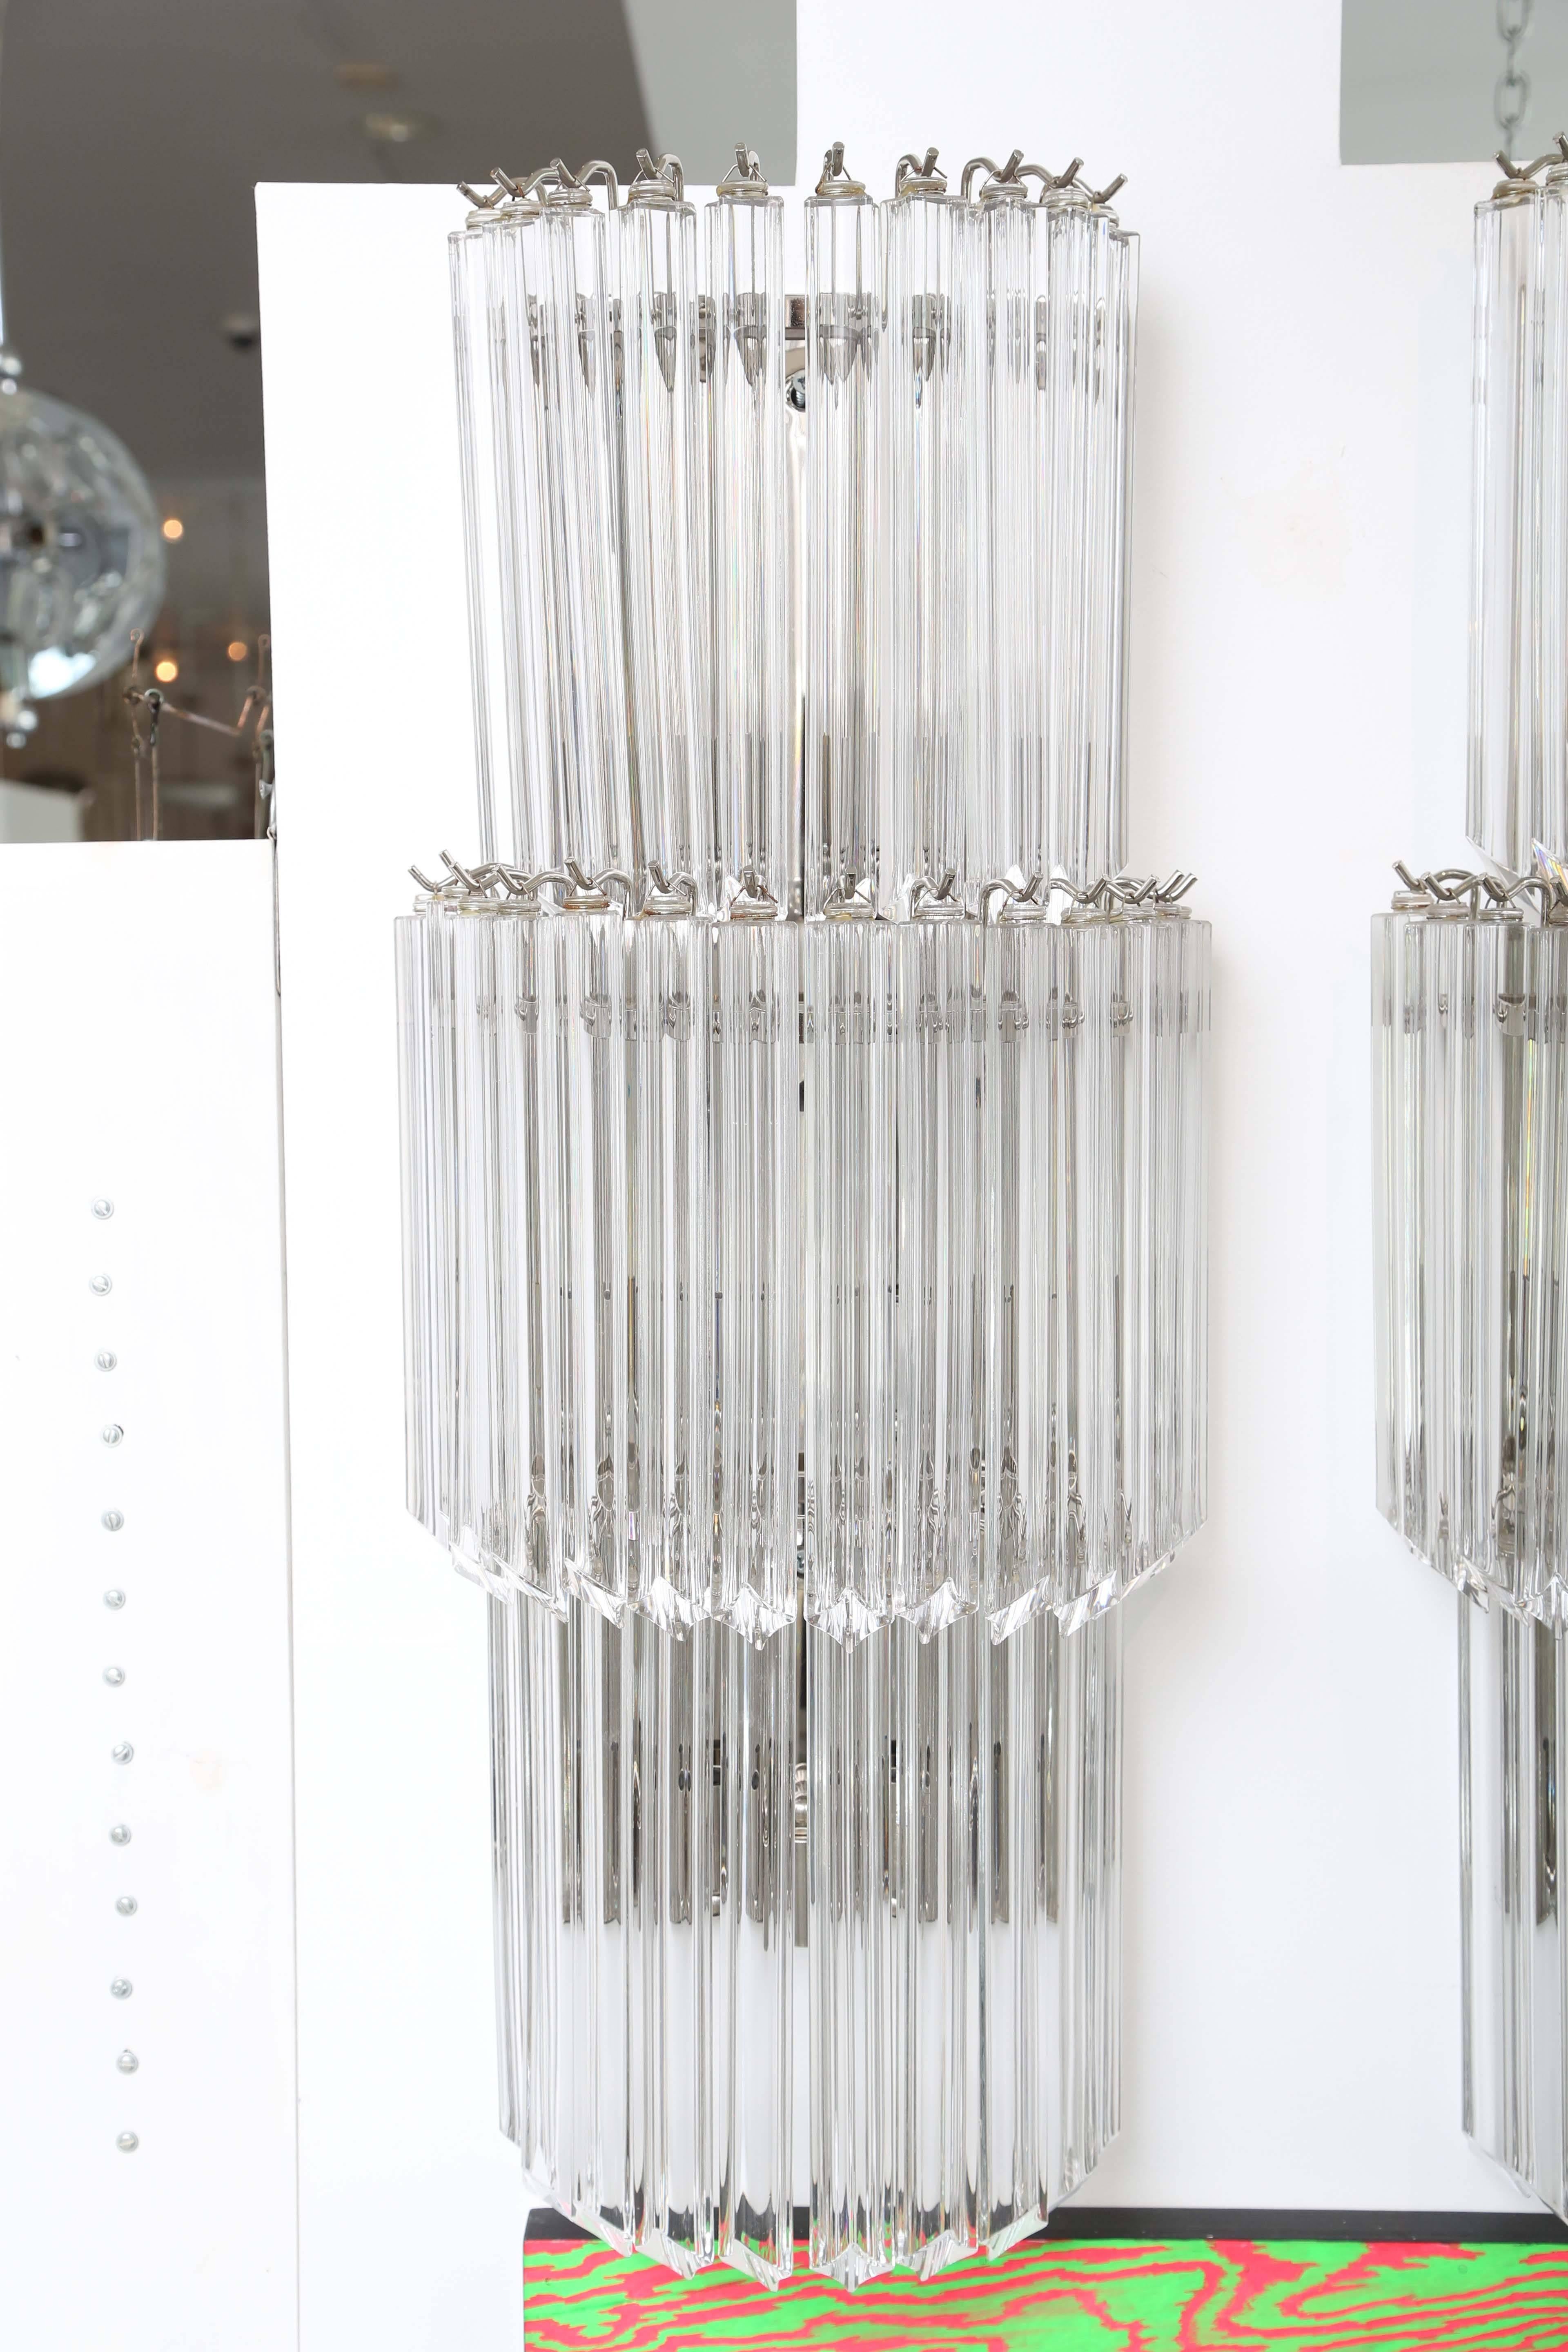 Pair of newly nickel-plated crystal glass sconces by Camer.